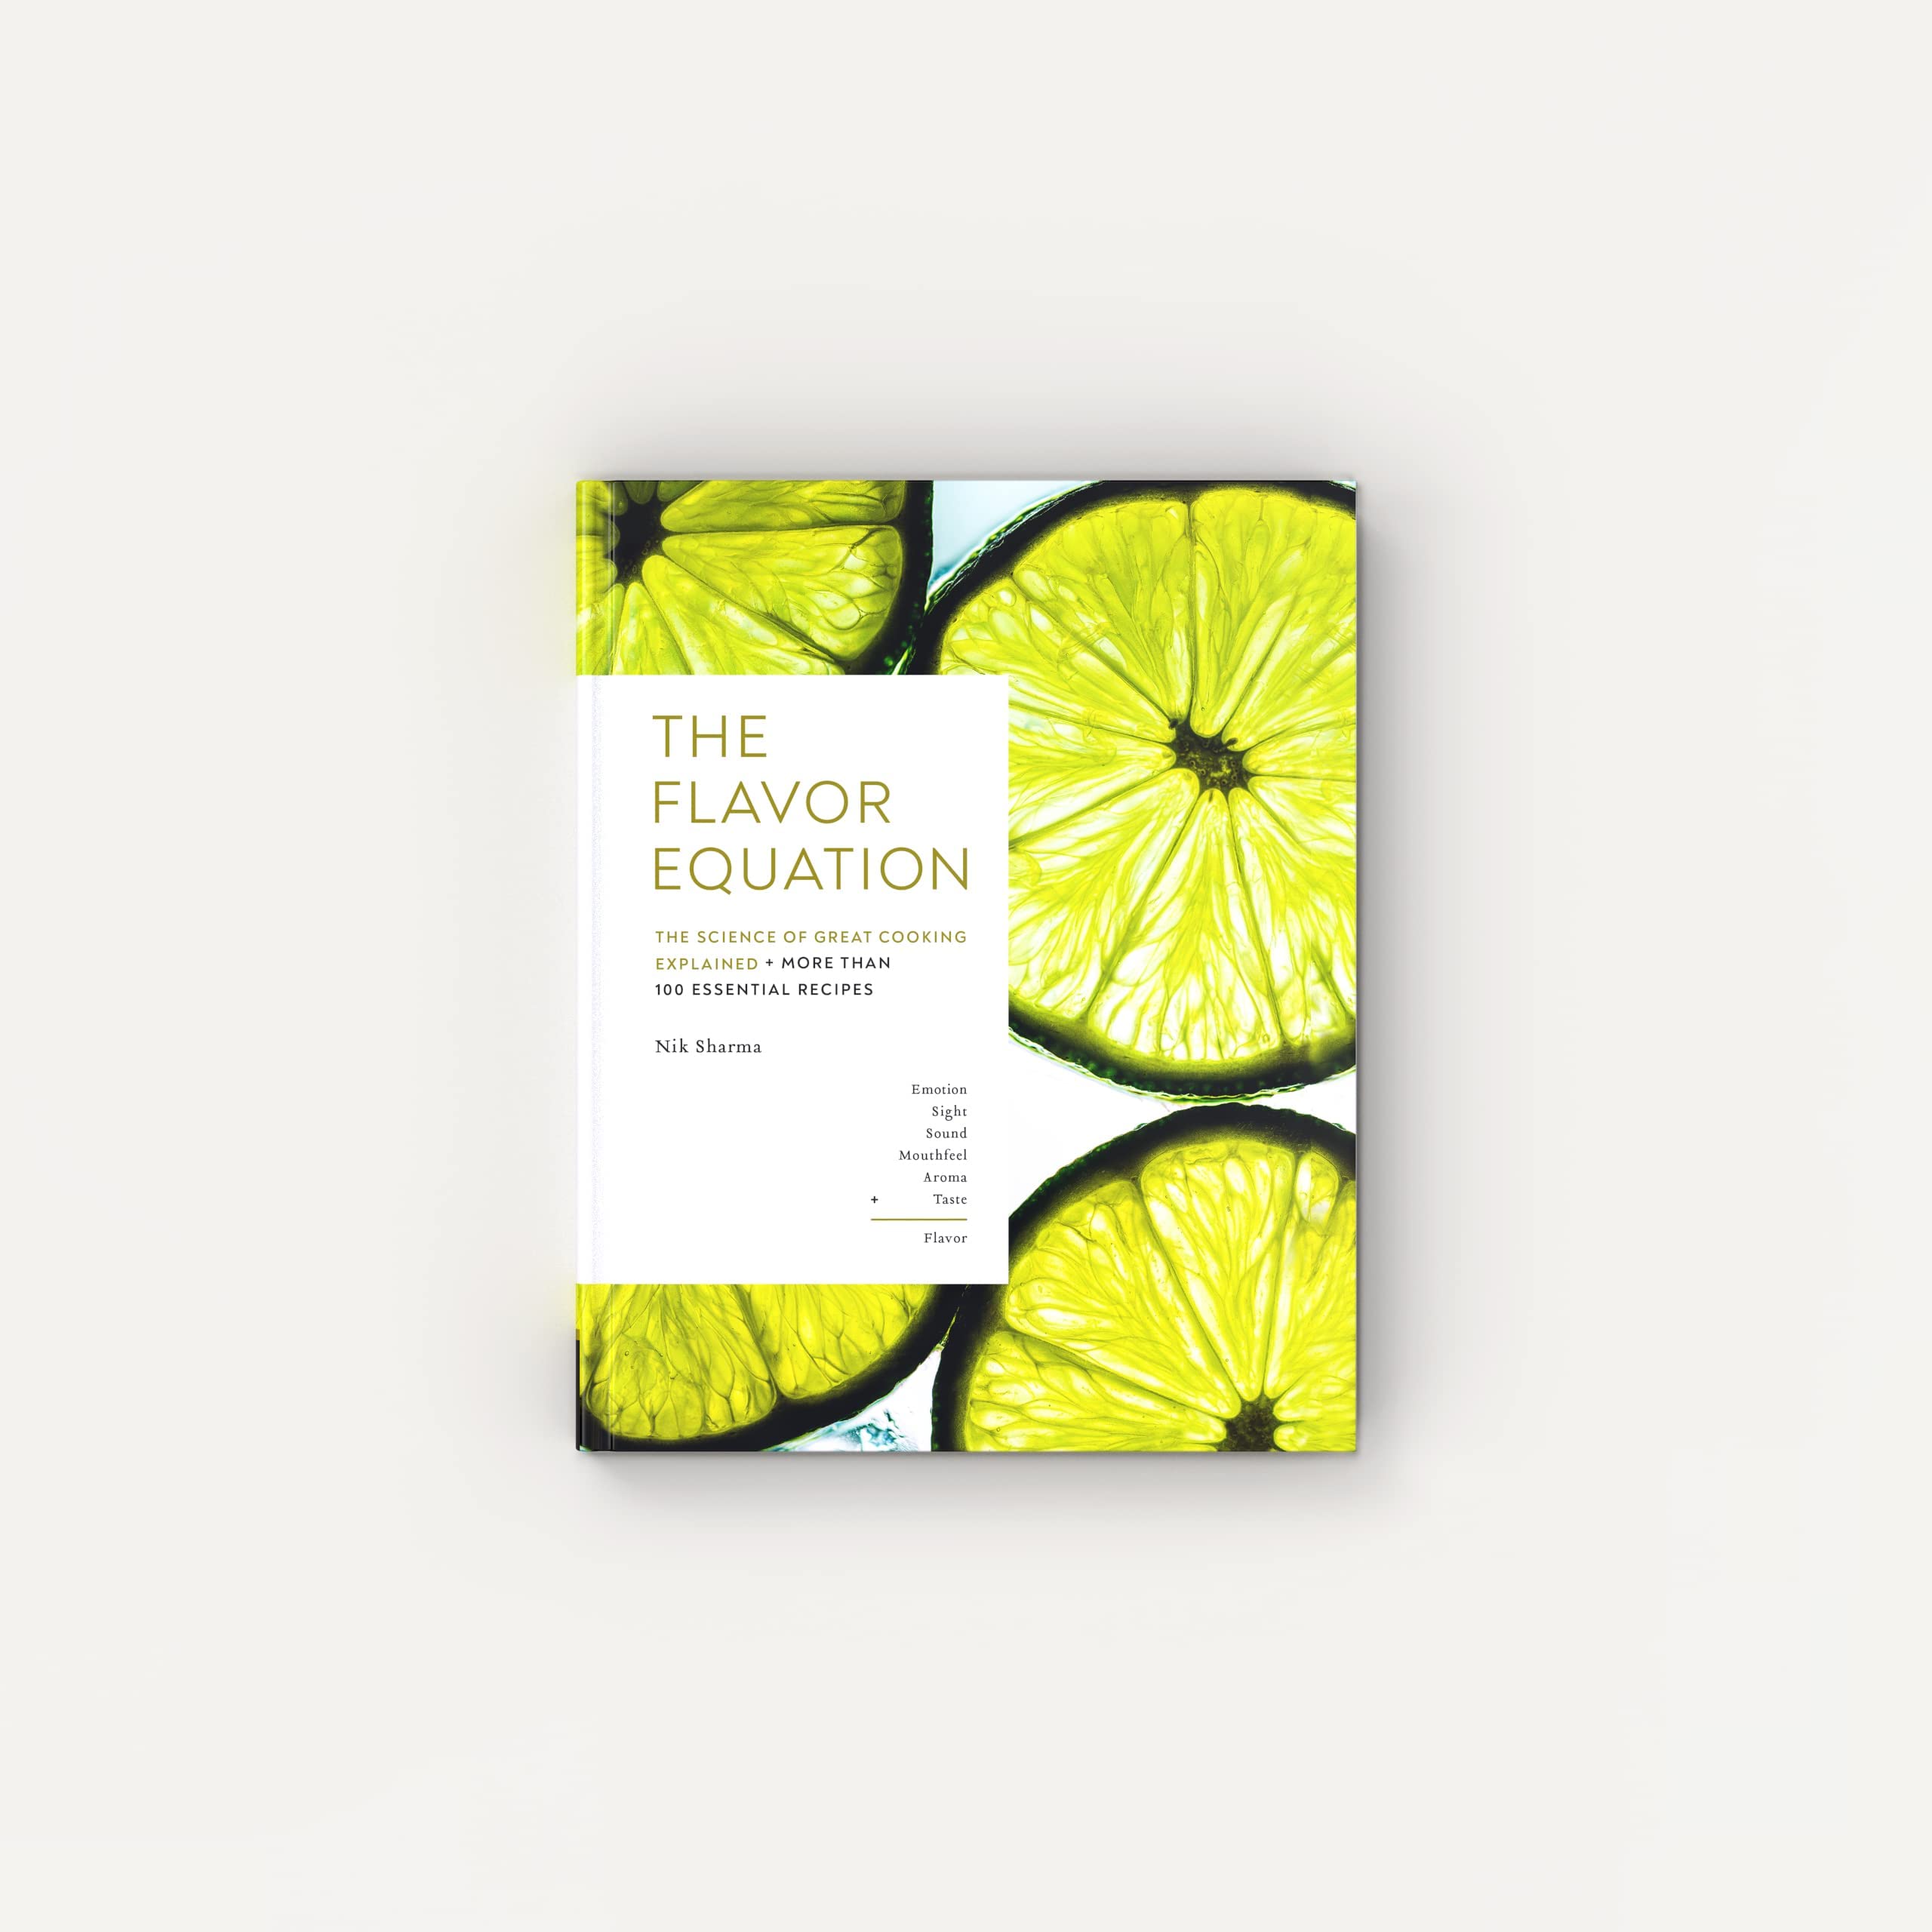 The Flavor Equation: The Science of Great Cooking Explained + More Than 100 Essential Recipes